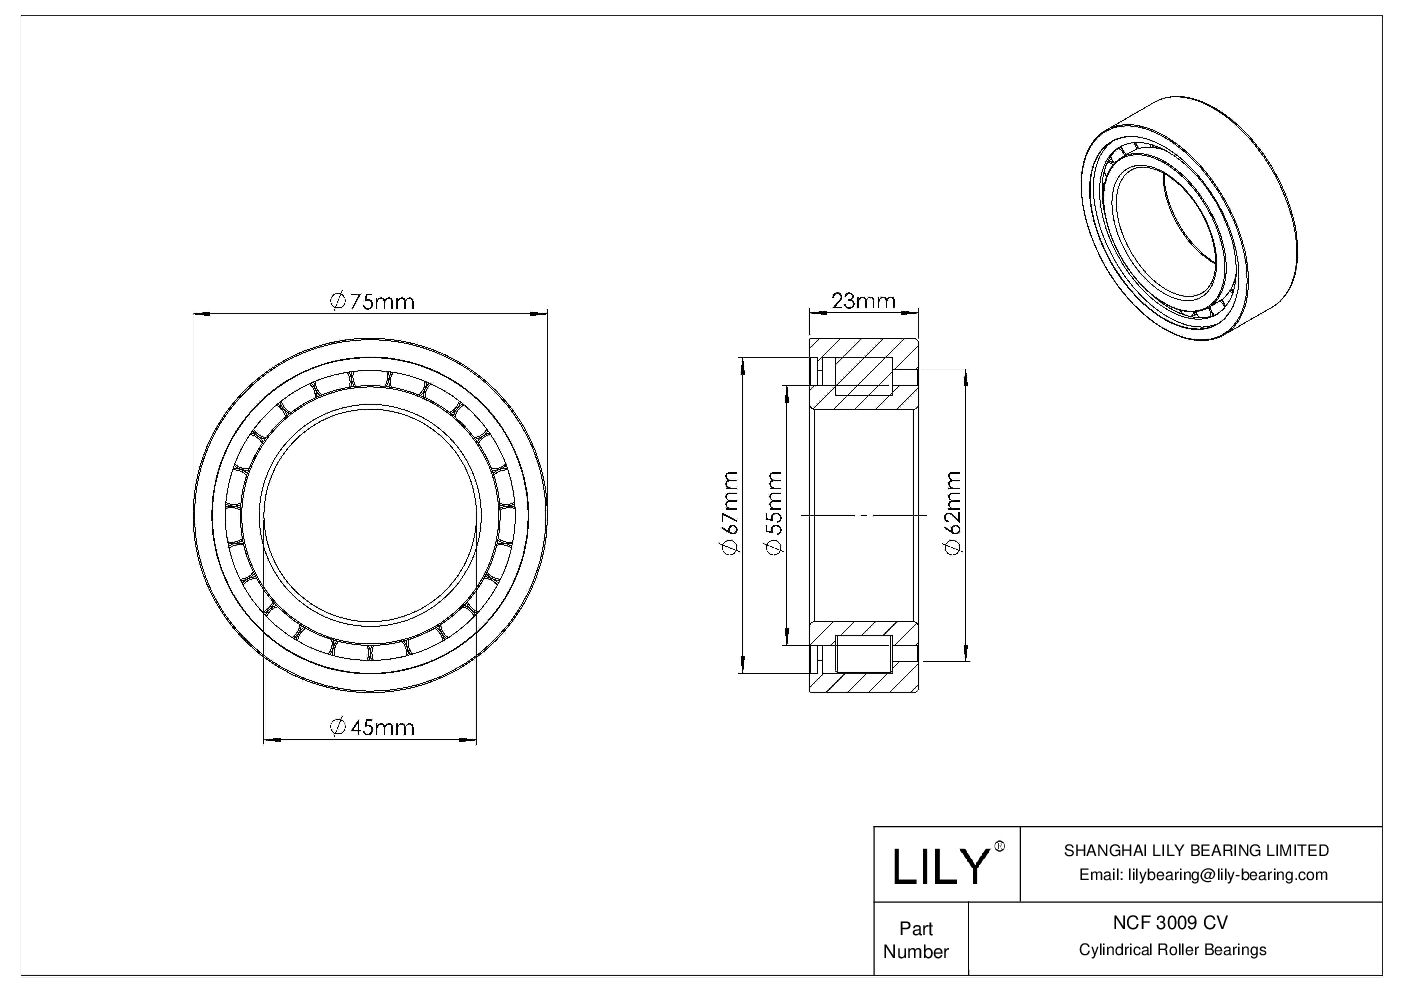 NCF 3009 CV Single Row Full Complement Cylindrical Roller Bearings cad drawing